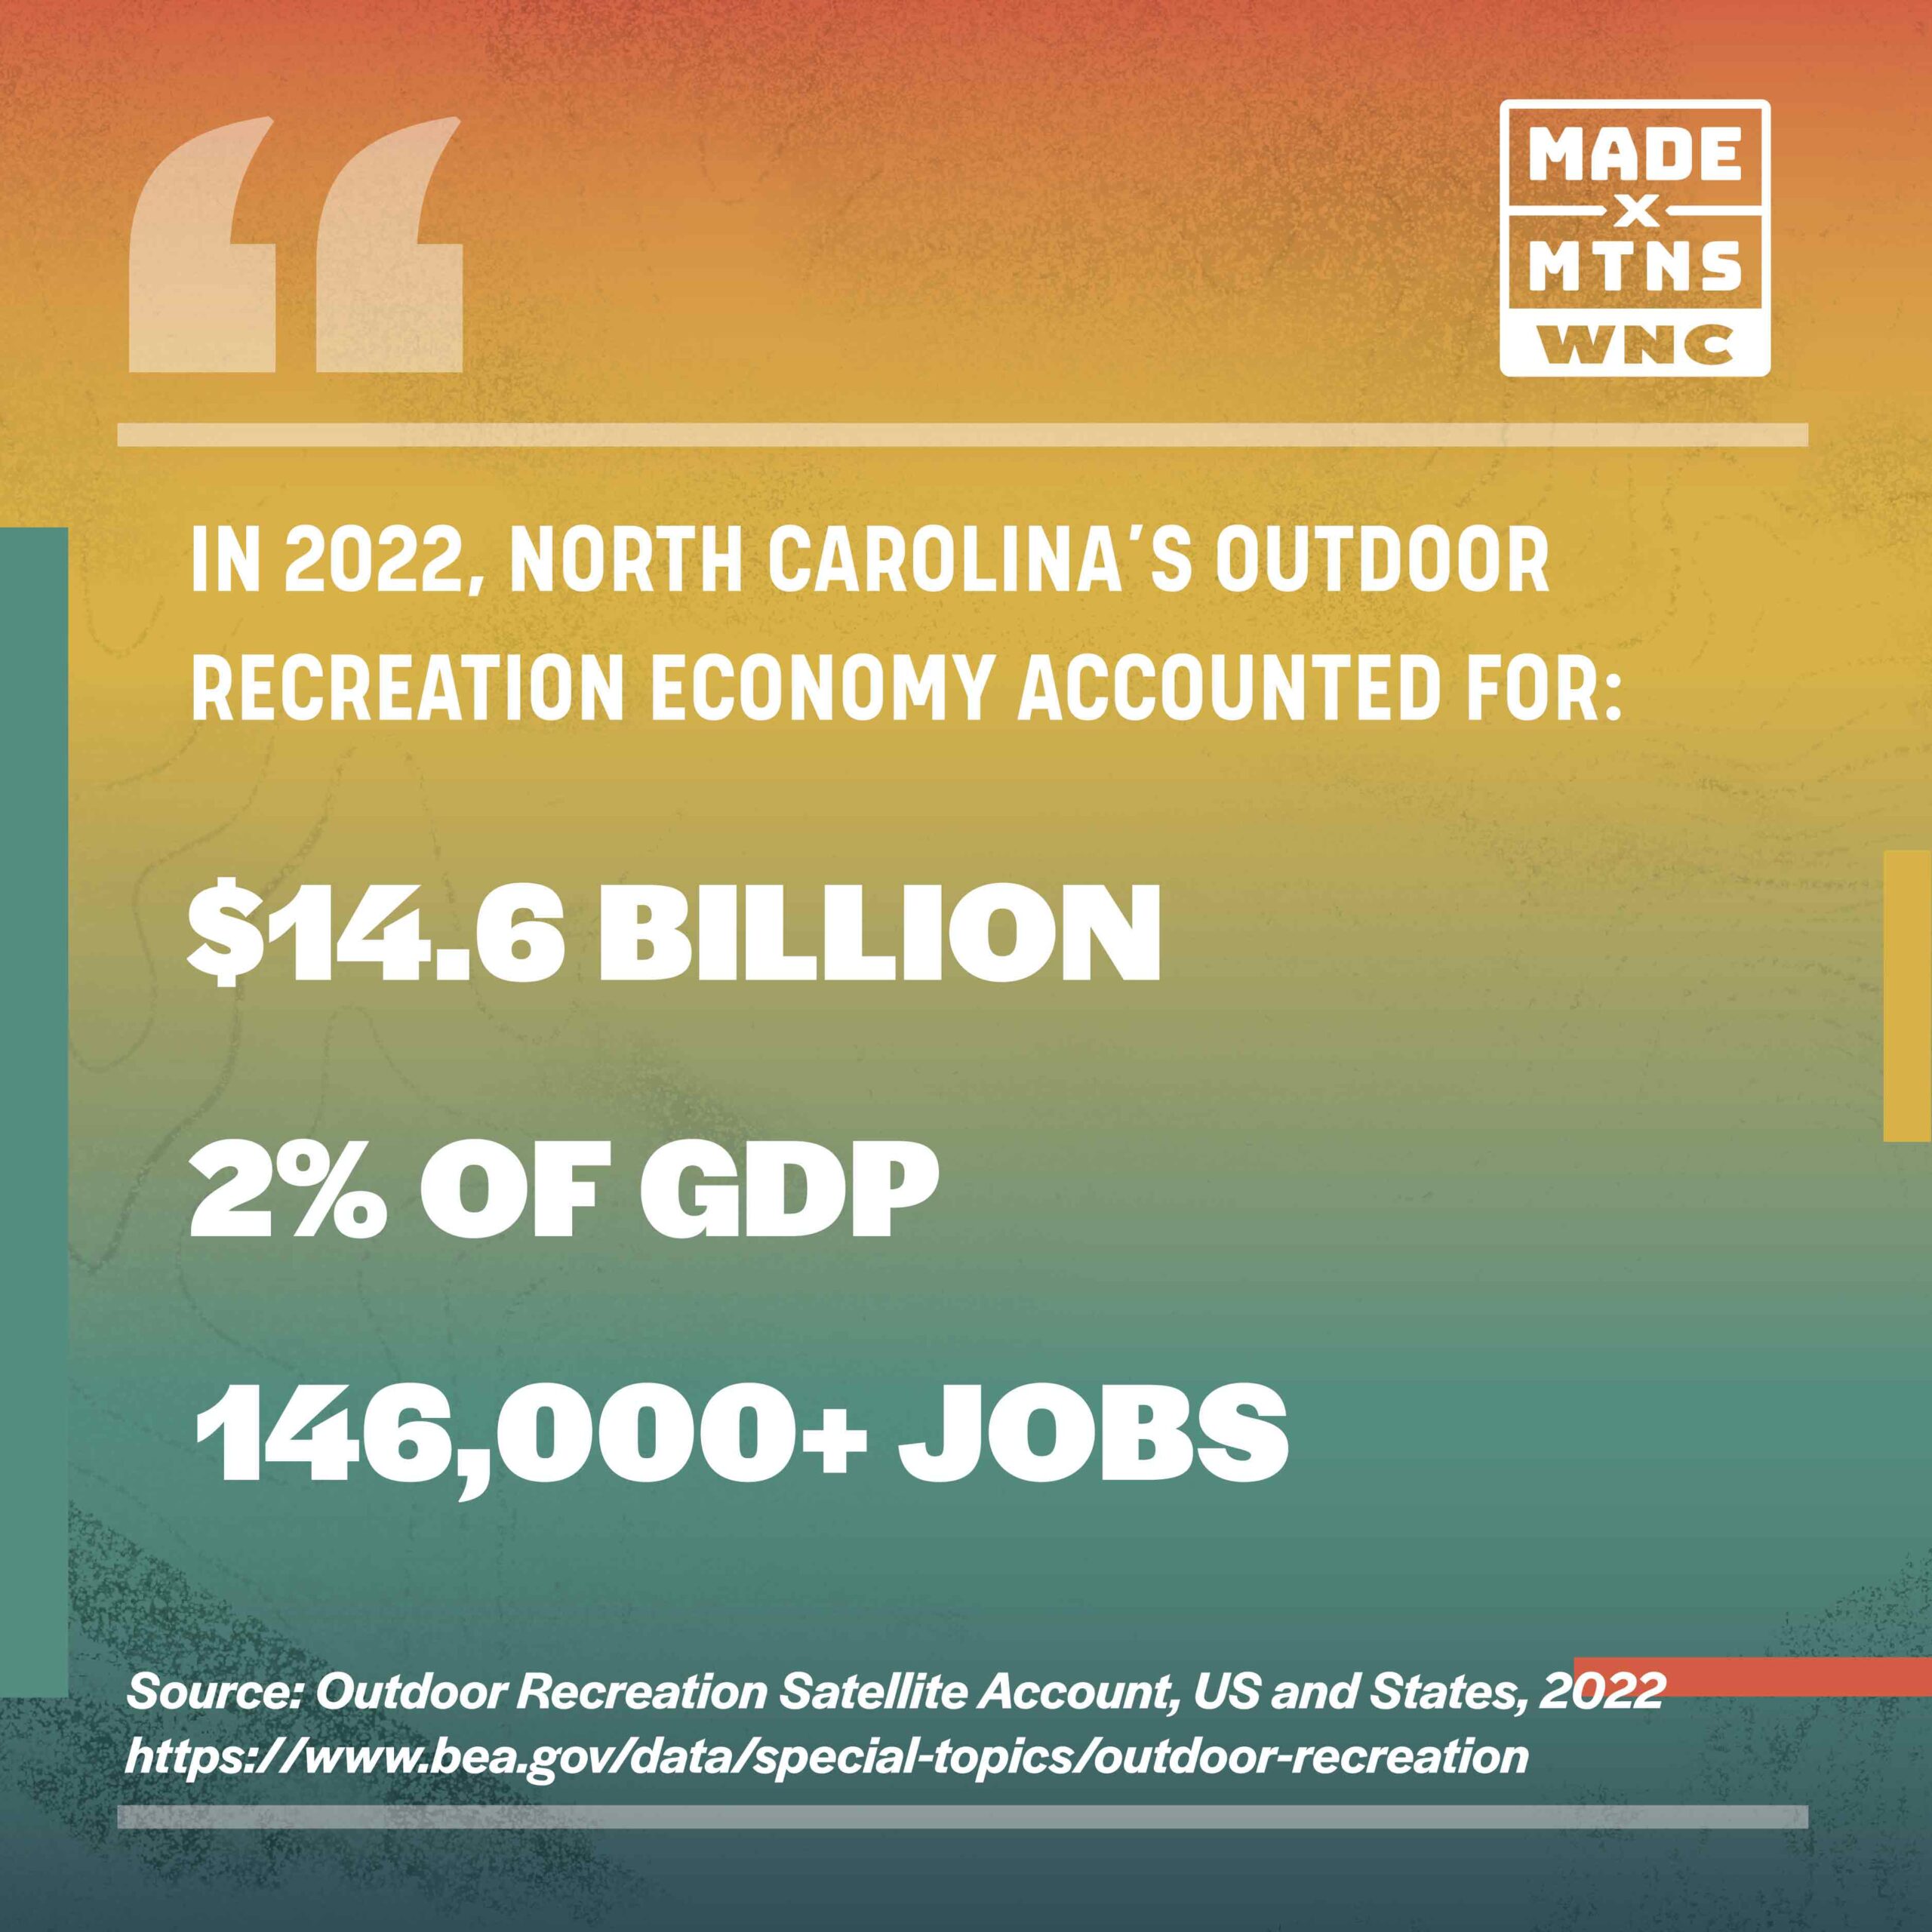 Outdoor recreation remains a powerful economic driver across North Carolina and nationwide, according to the U.S. Bureau of Economic Analysis